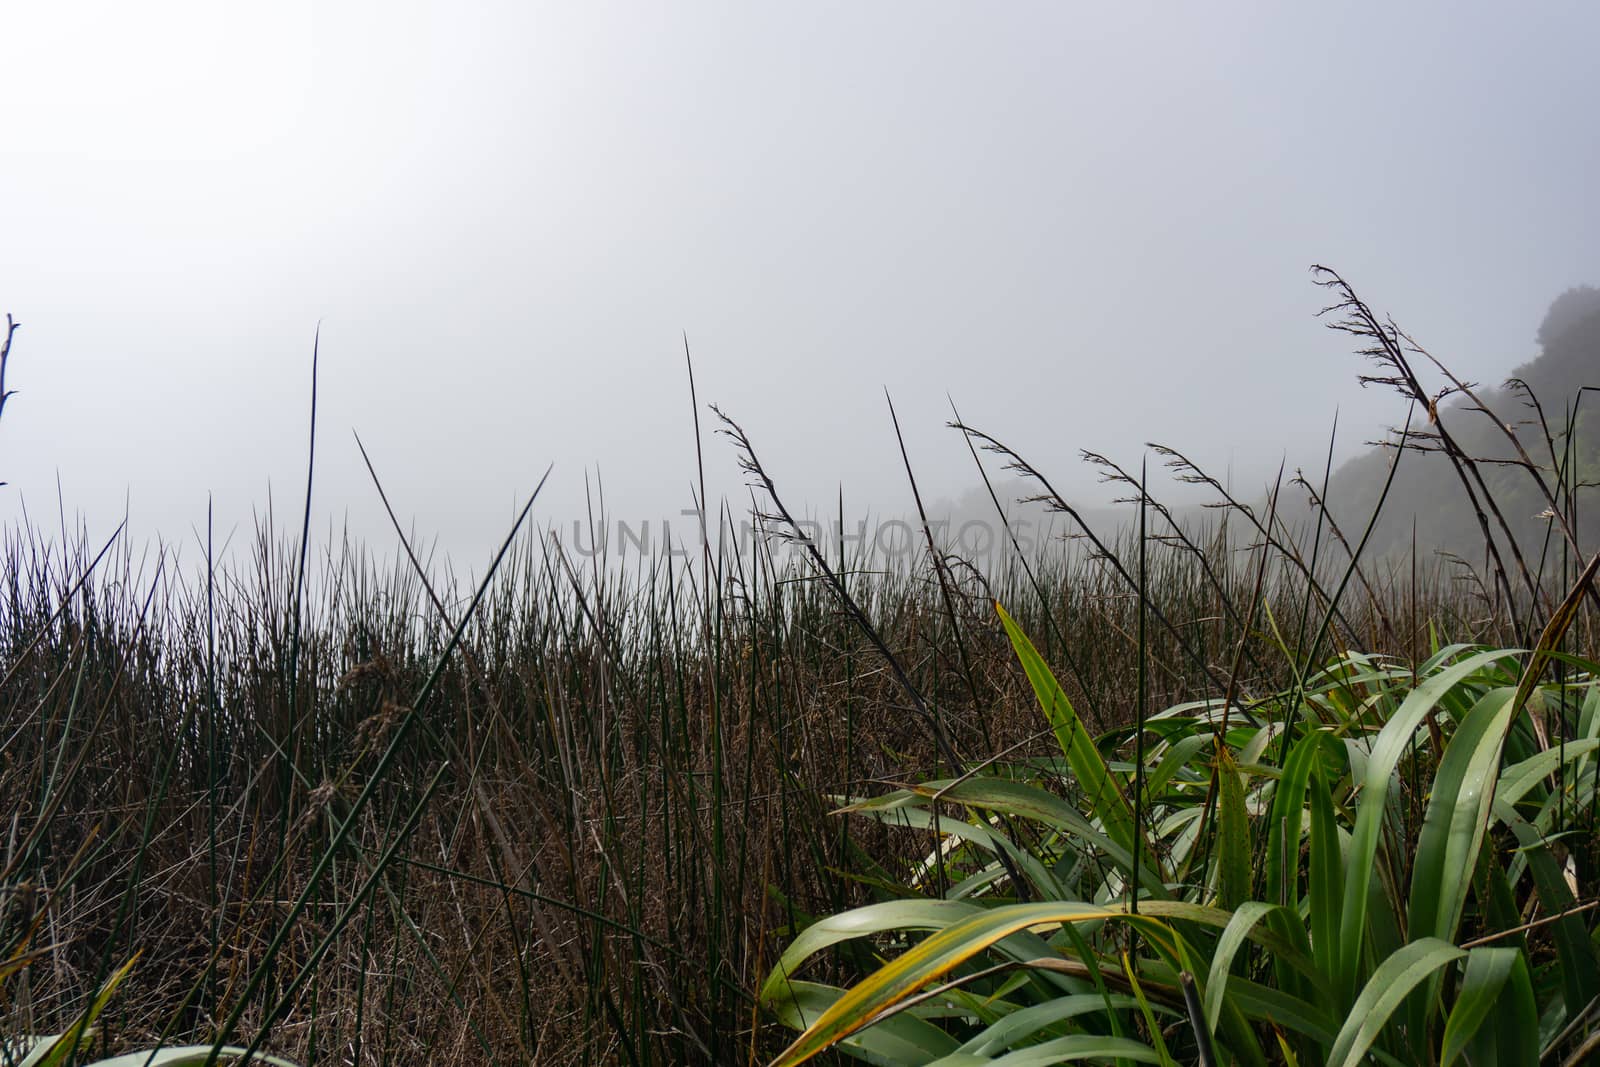 Wetland vegetation form low perspective under hazy grey winter sky with dense growth or reeds and green flax.